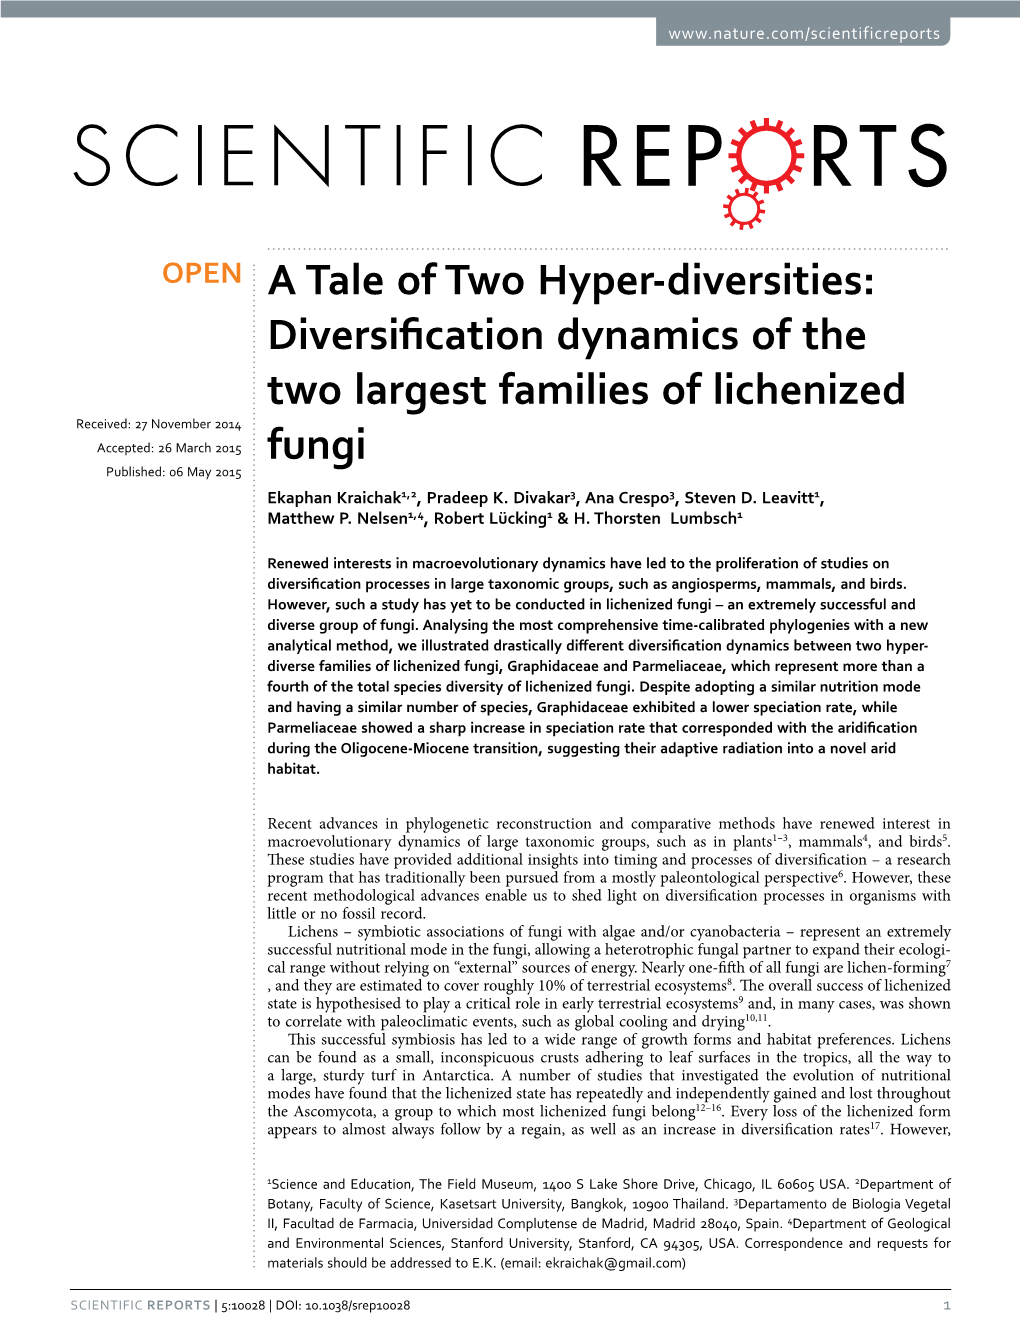 Diversification Dynamics of the Two Largest Families Of